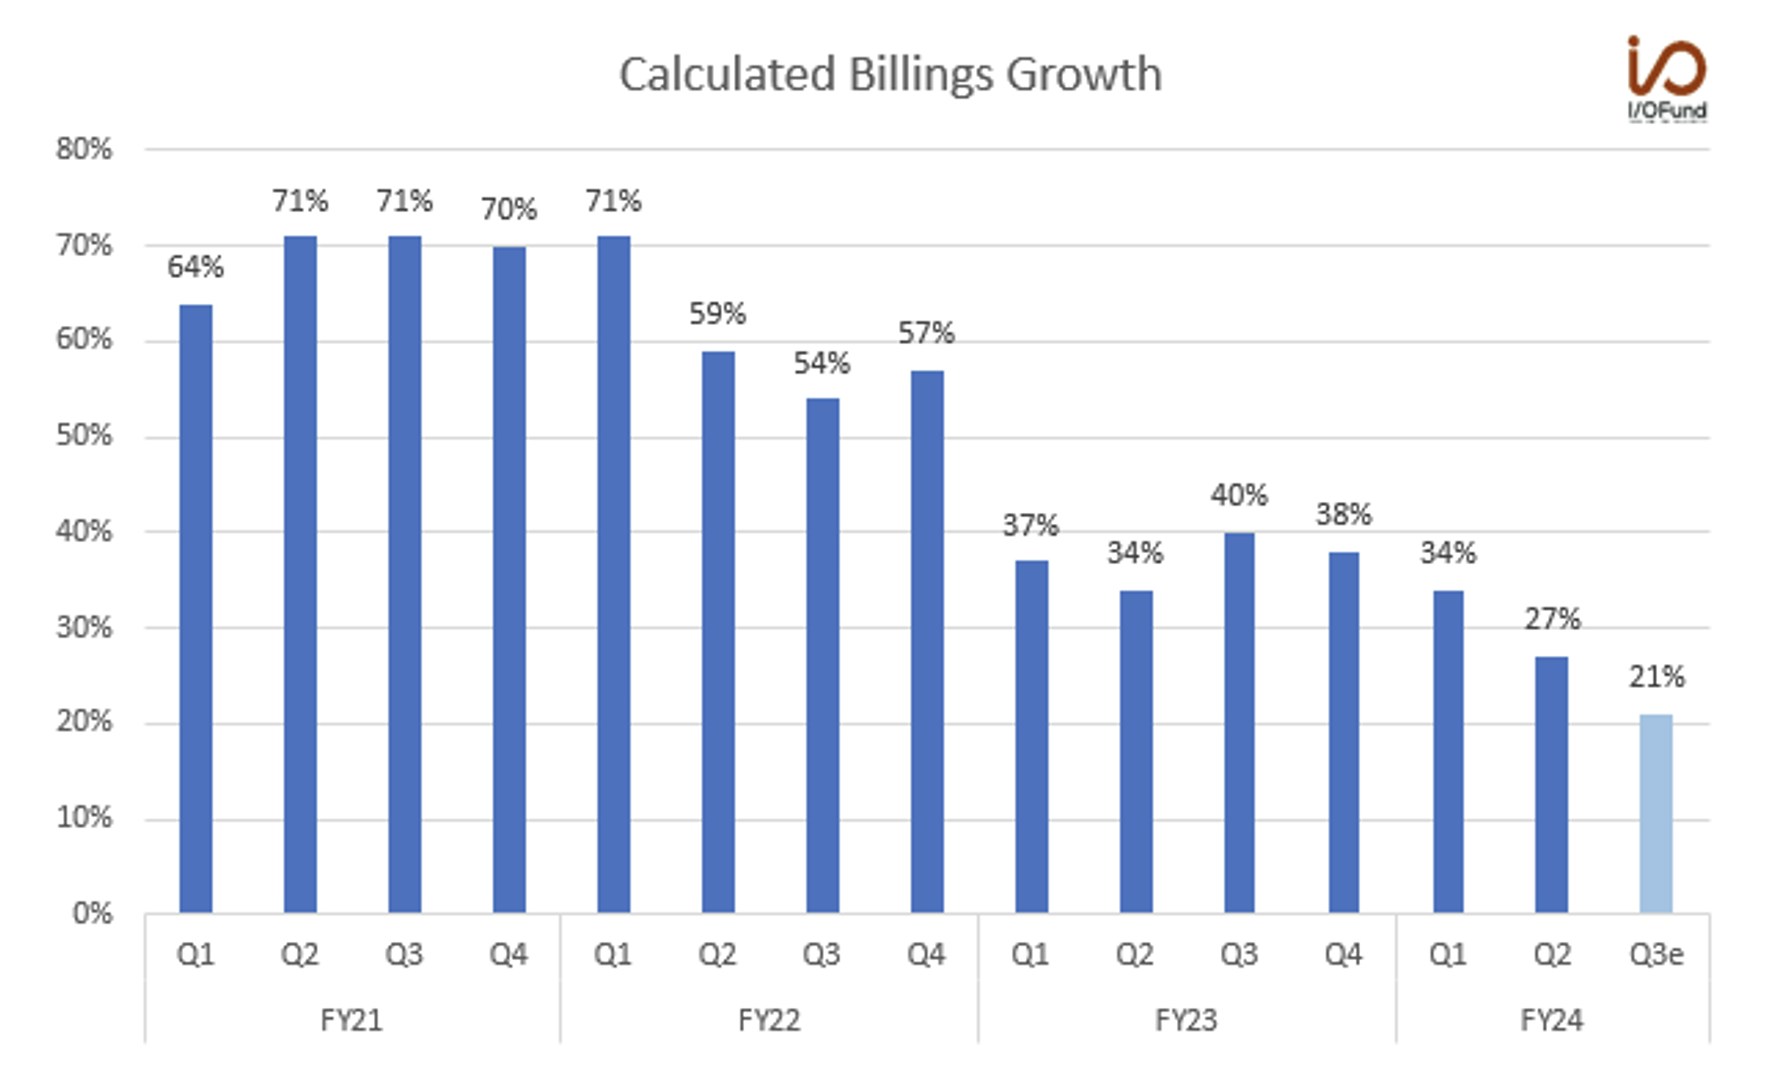 Calculated Billings Growth